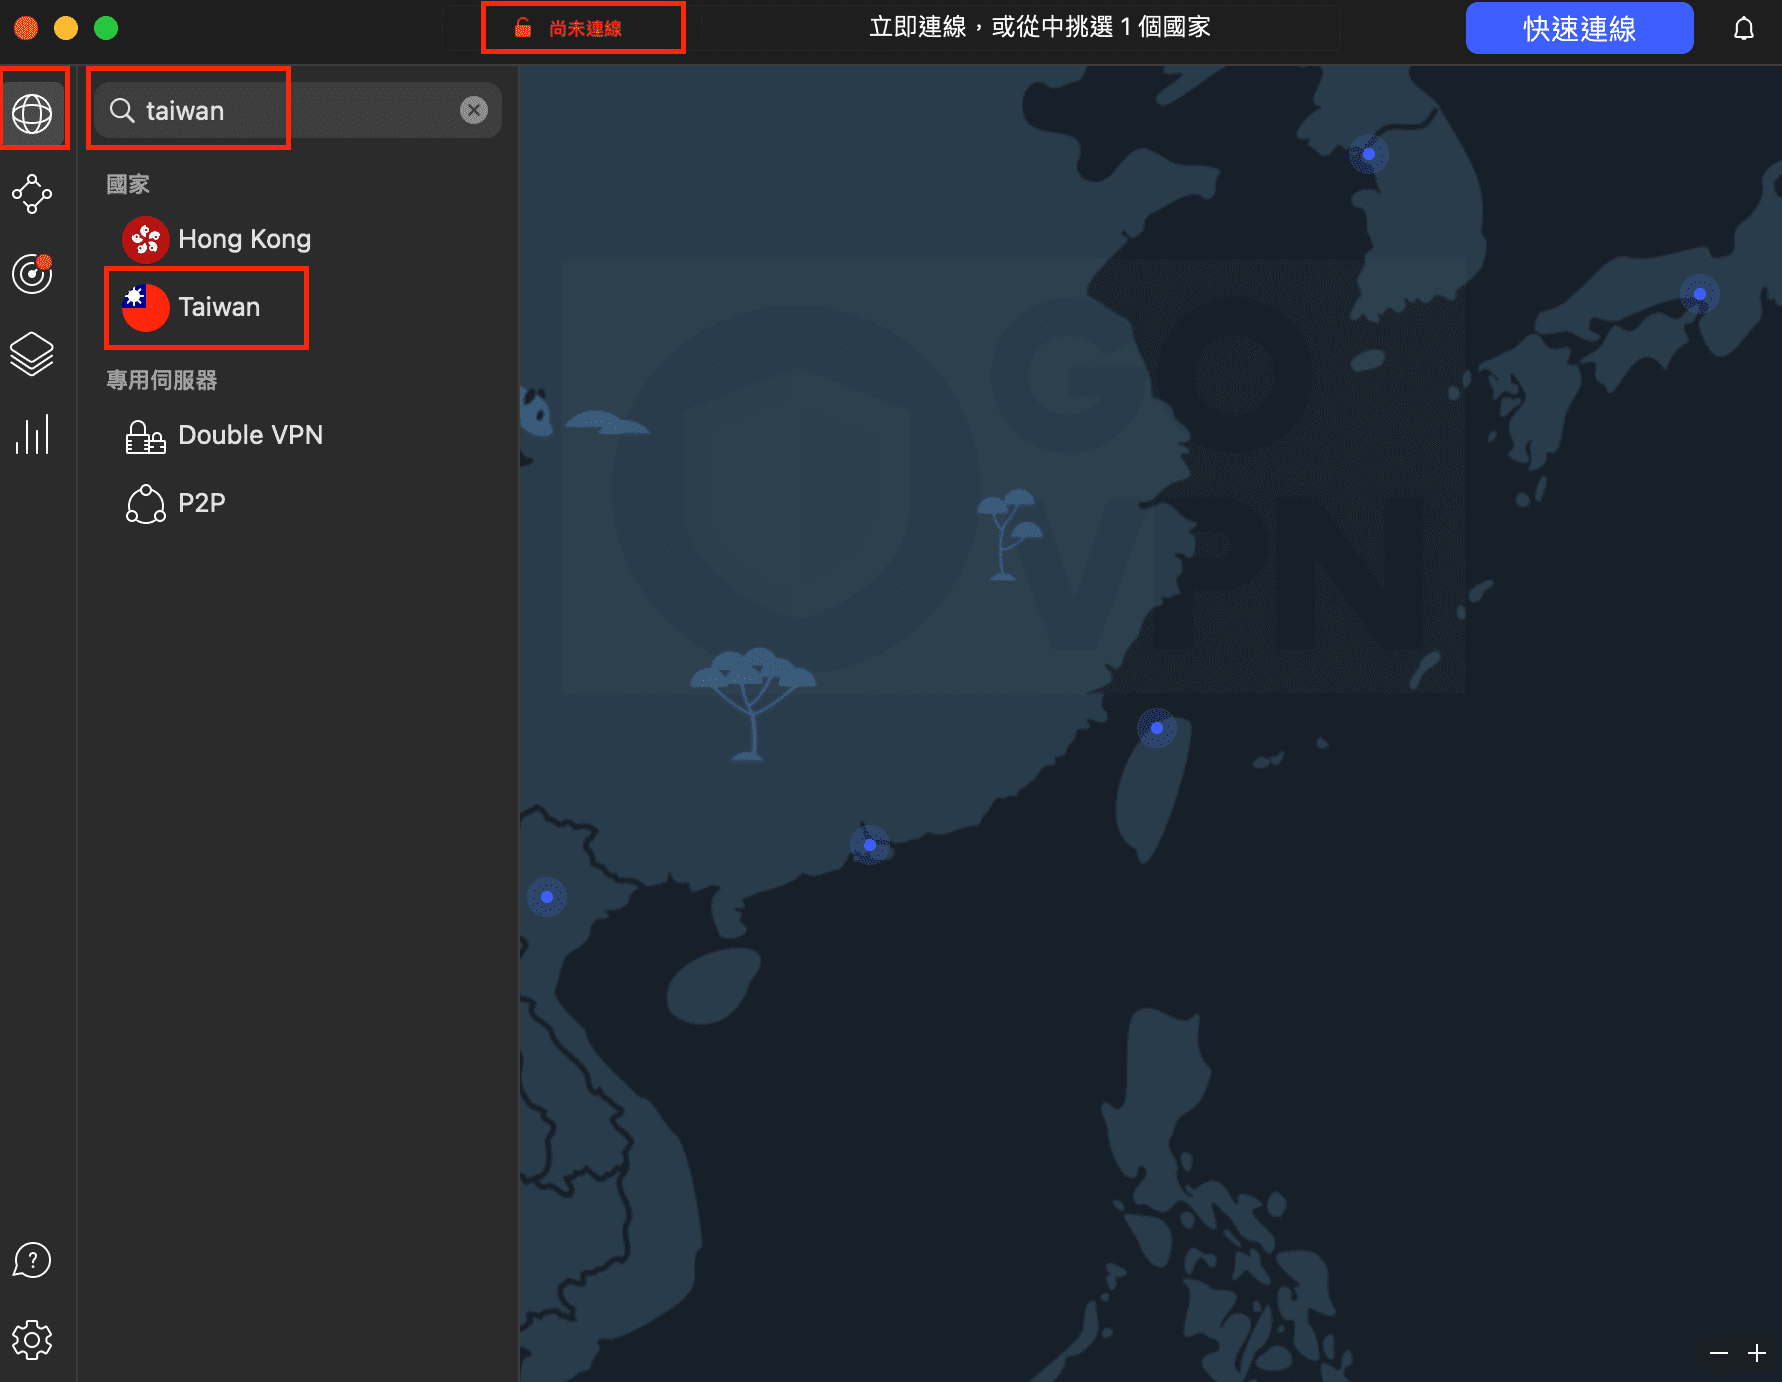 NordVPN how to connect taiwan 2